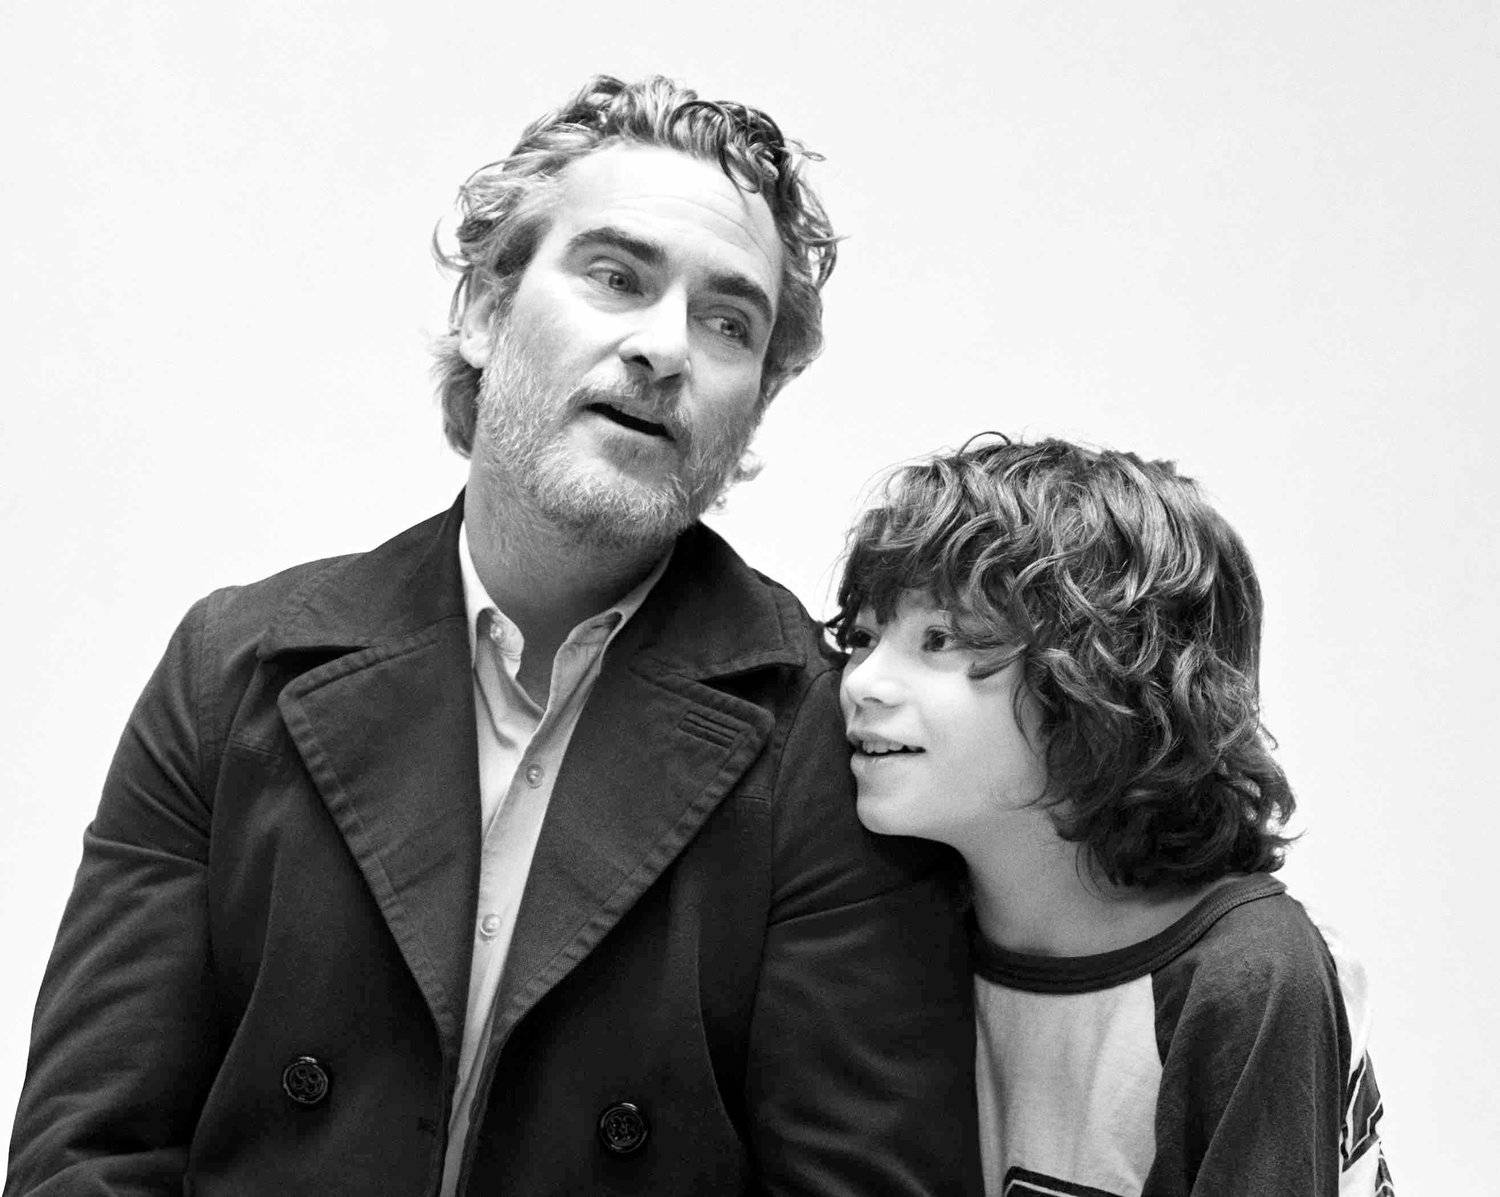 Transformational relationship — Joaquin Phoenix and Woody Norman in a scene from “C’mon C’mon.”